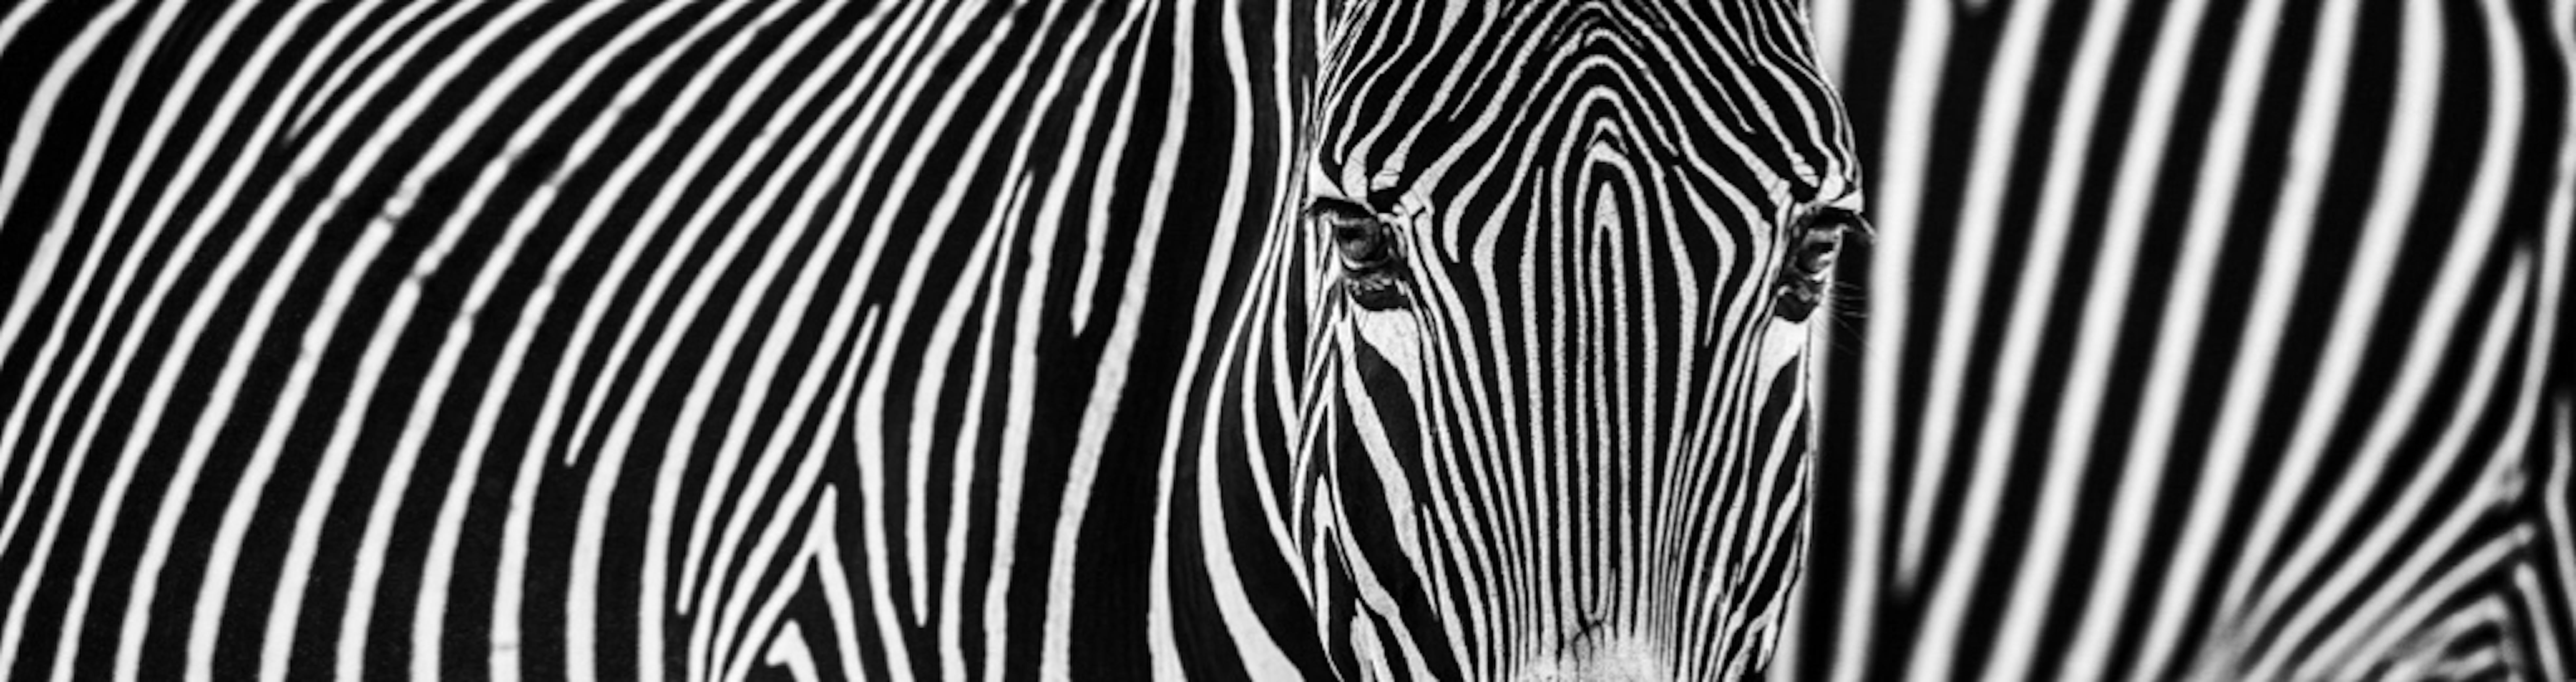 David Yarrow Black and White Photograph - Parallel Lines 